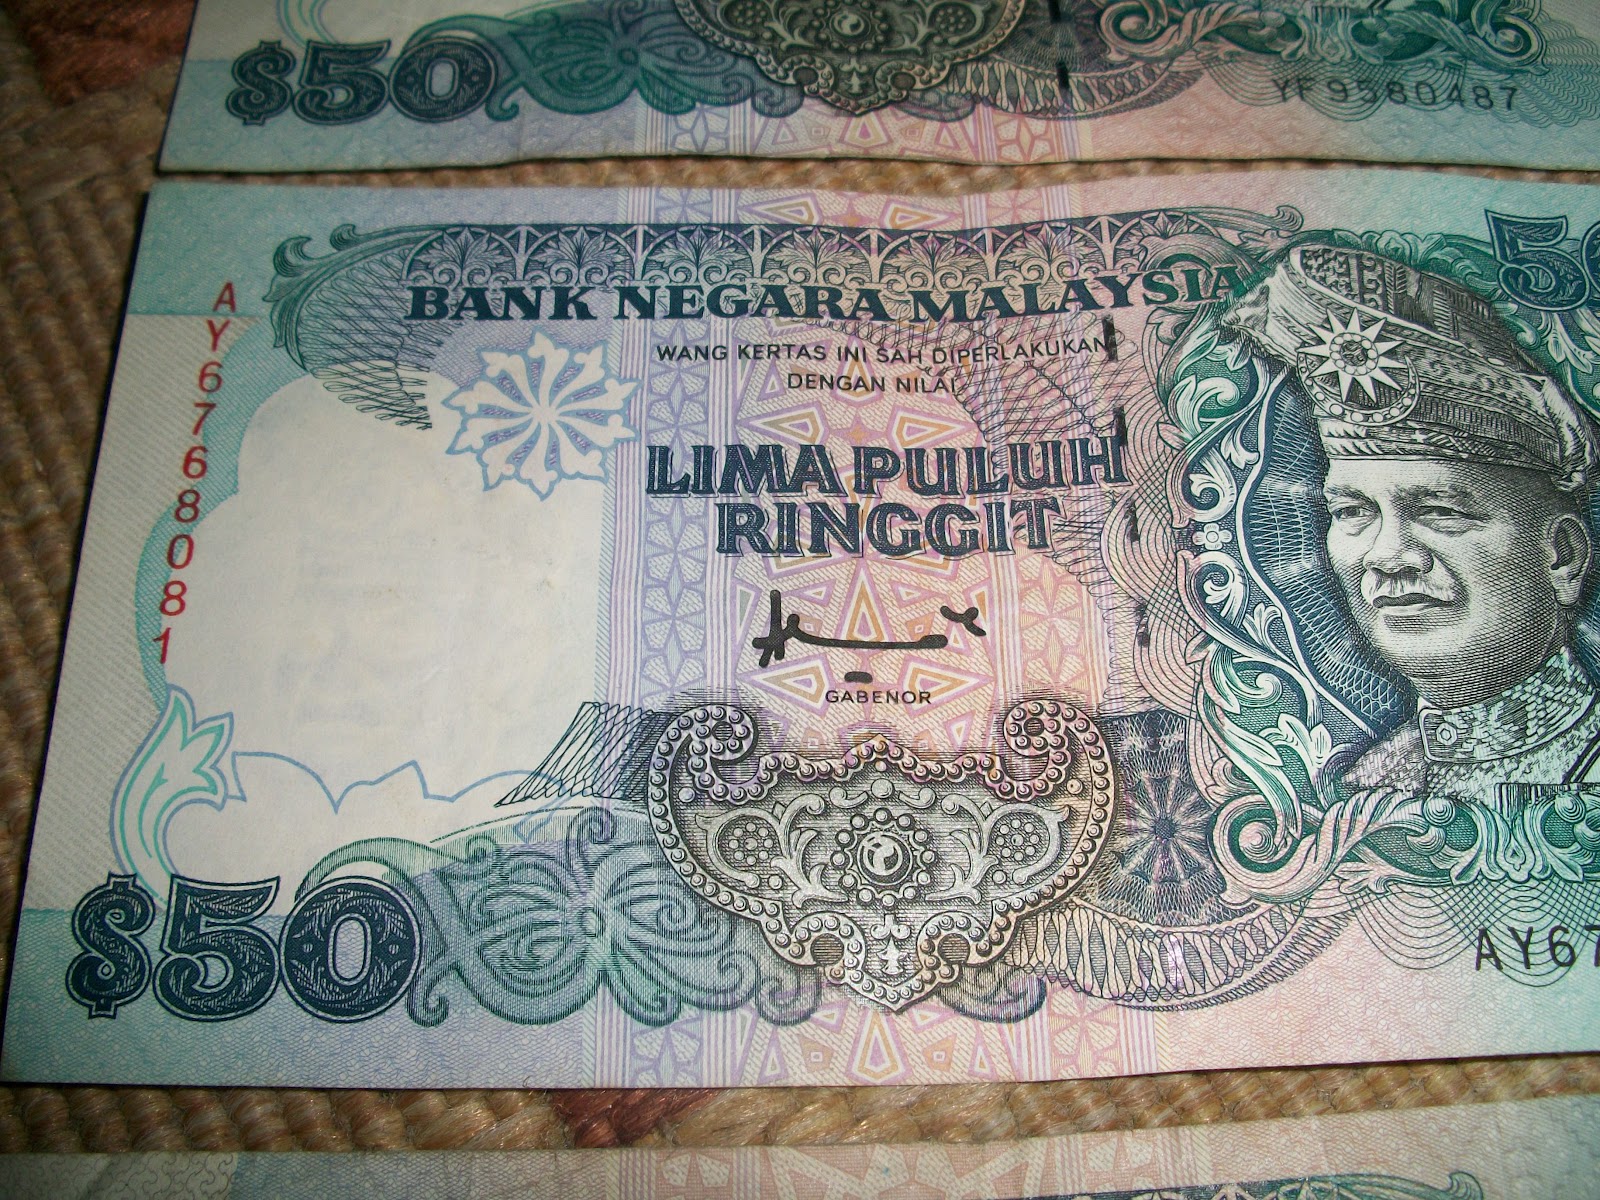 collectible items: Duit Malaysia lama RM50 with 3 different gabenor